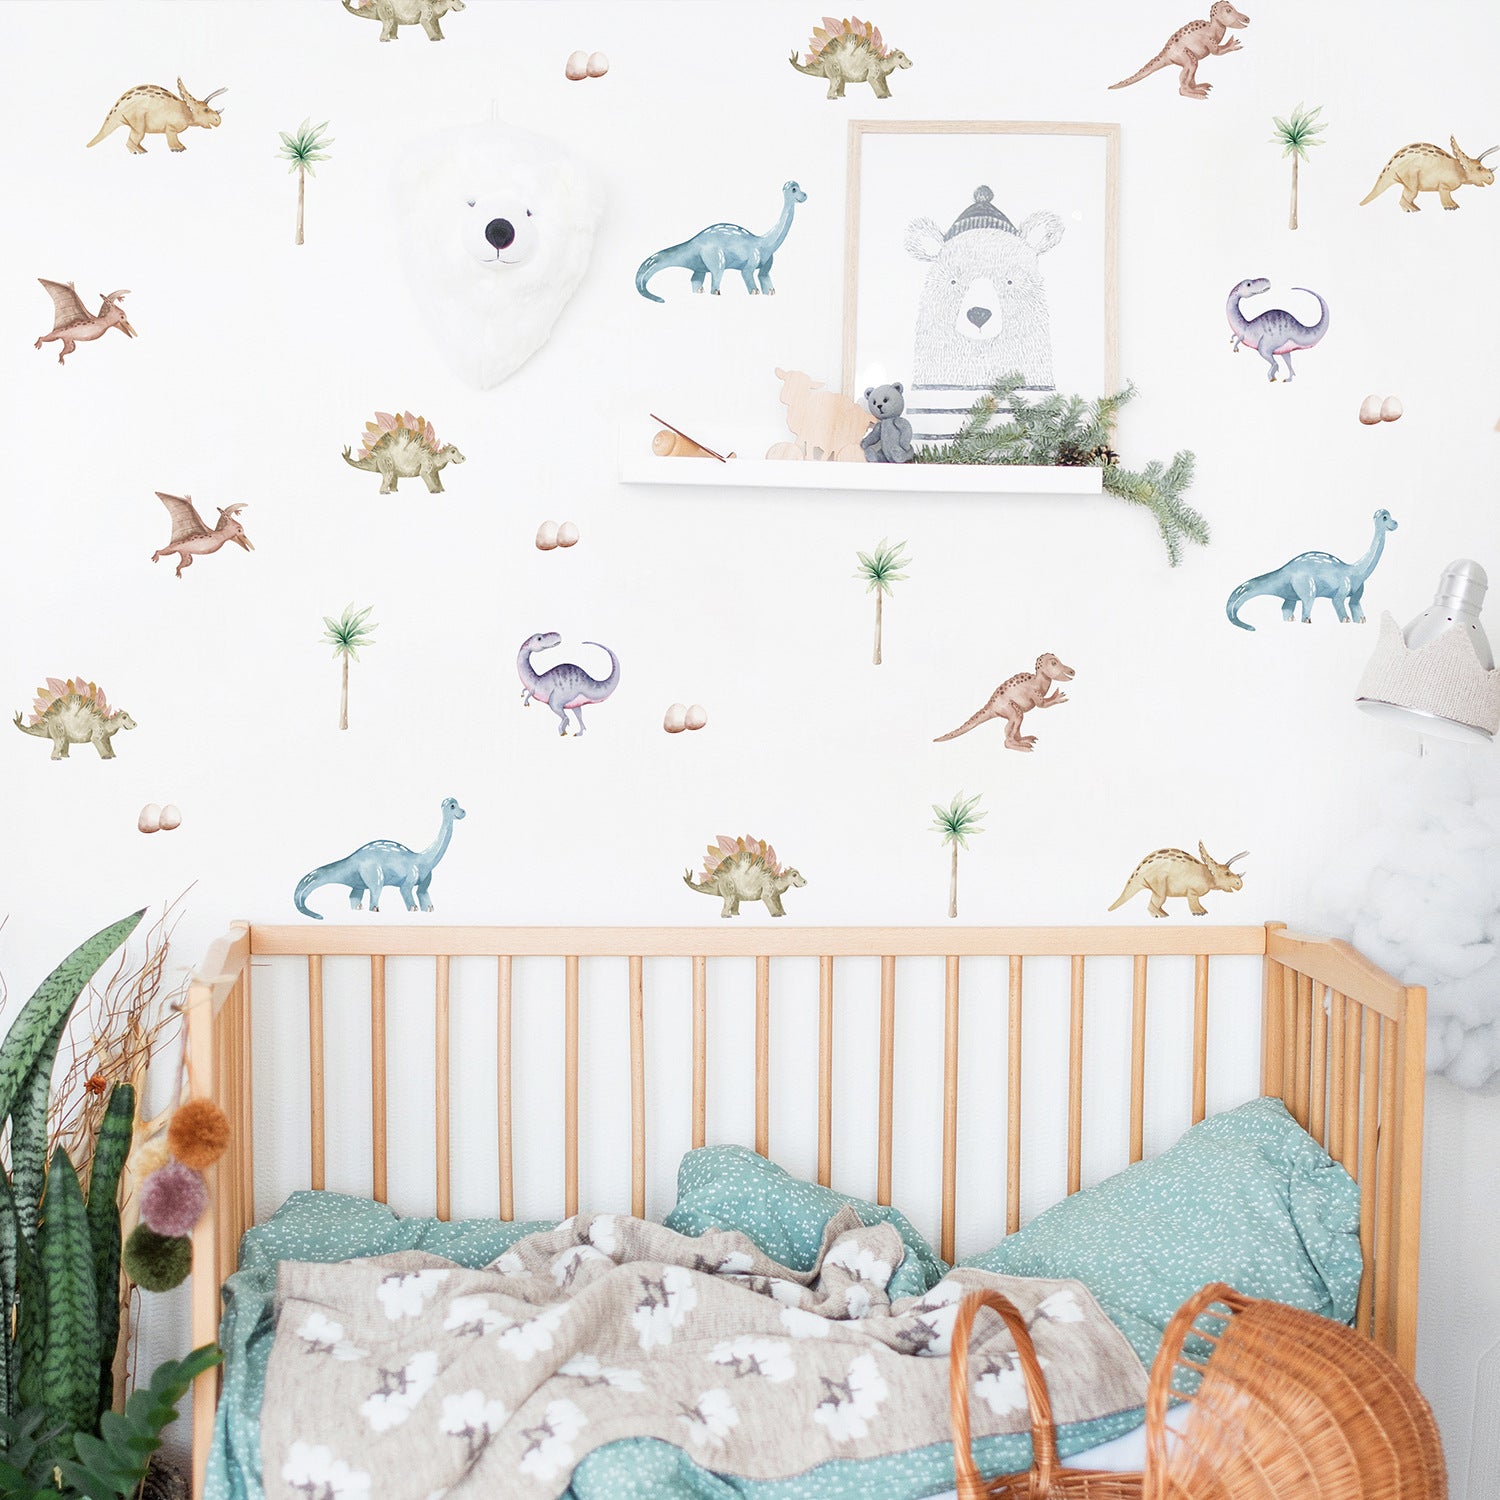 Watercolor Dinosaurs Wall Decals | Kids Room Wall Stickers - 40pcs - Taylorson